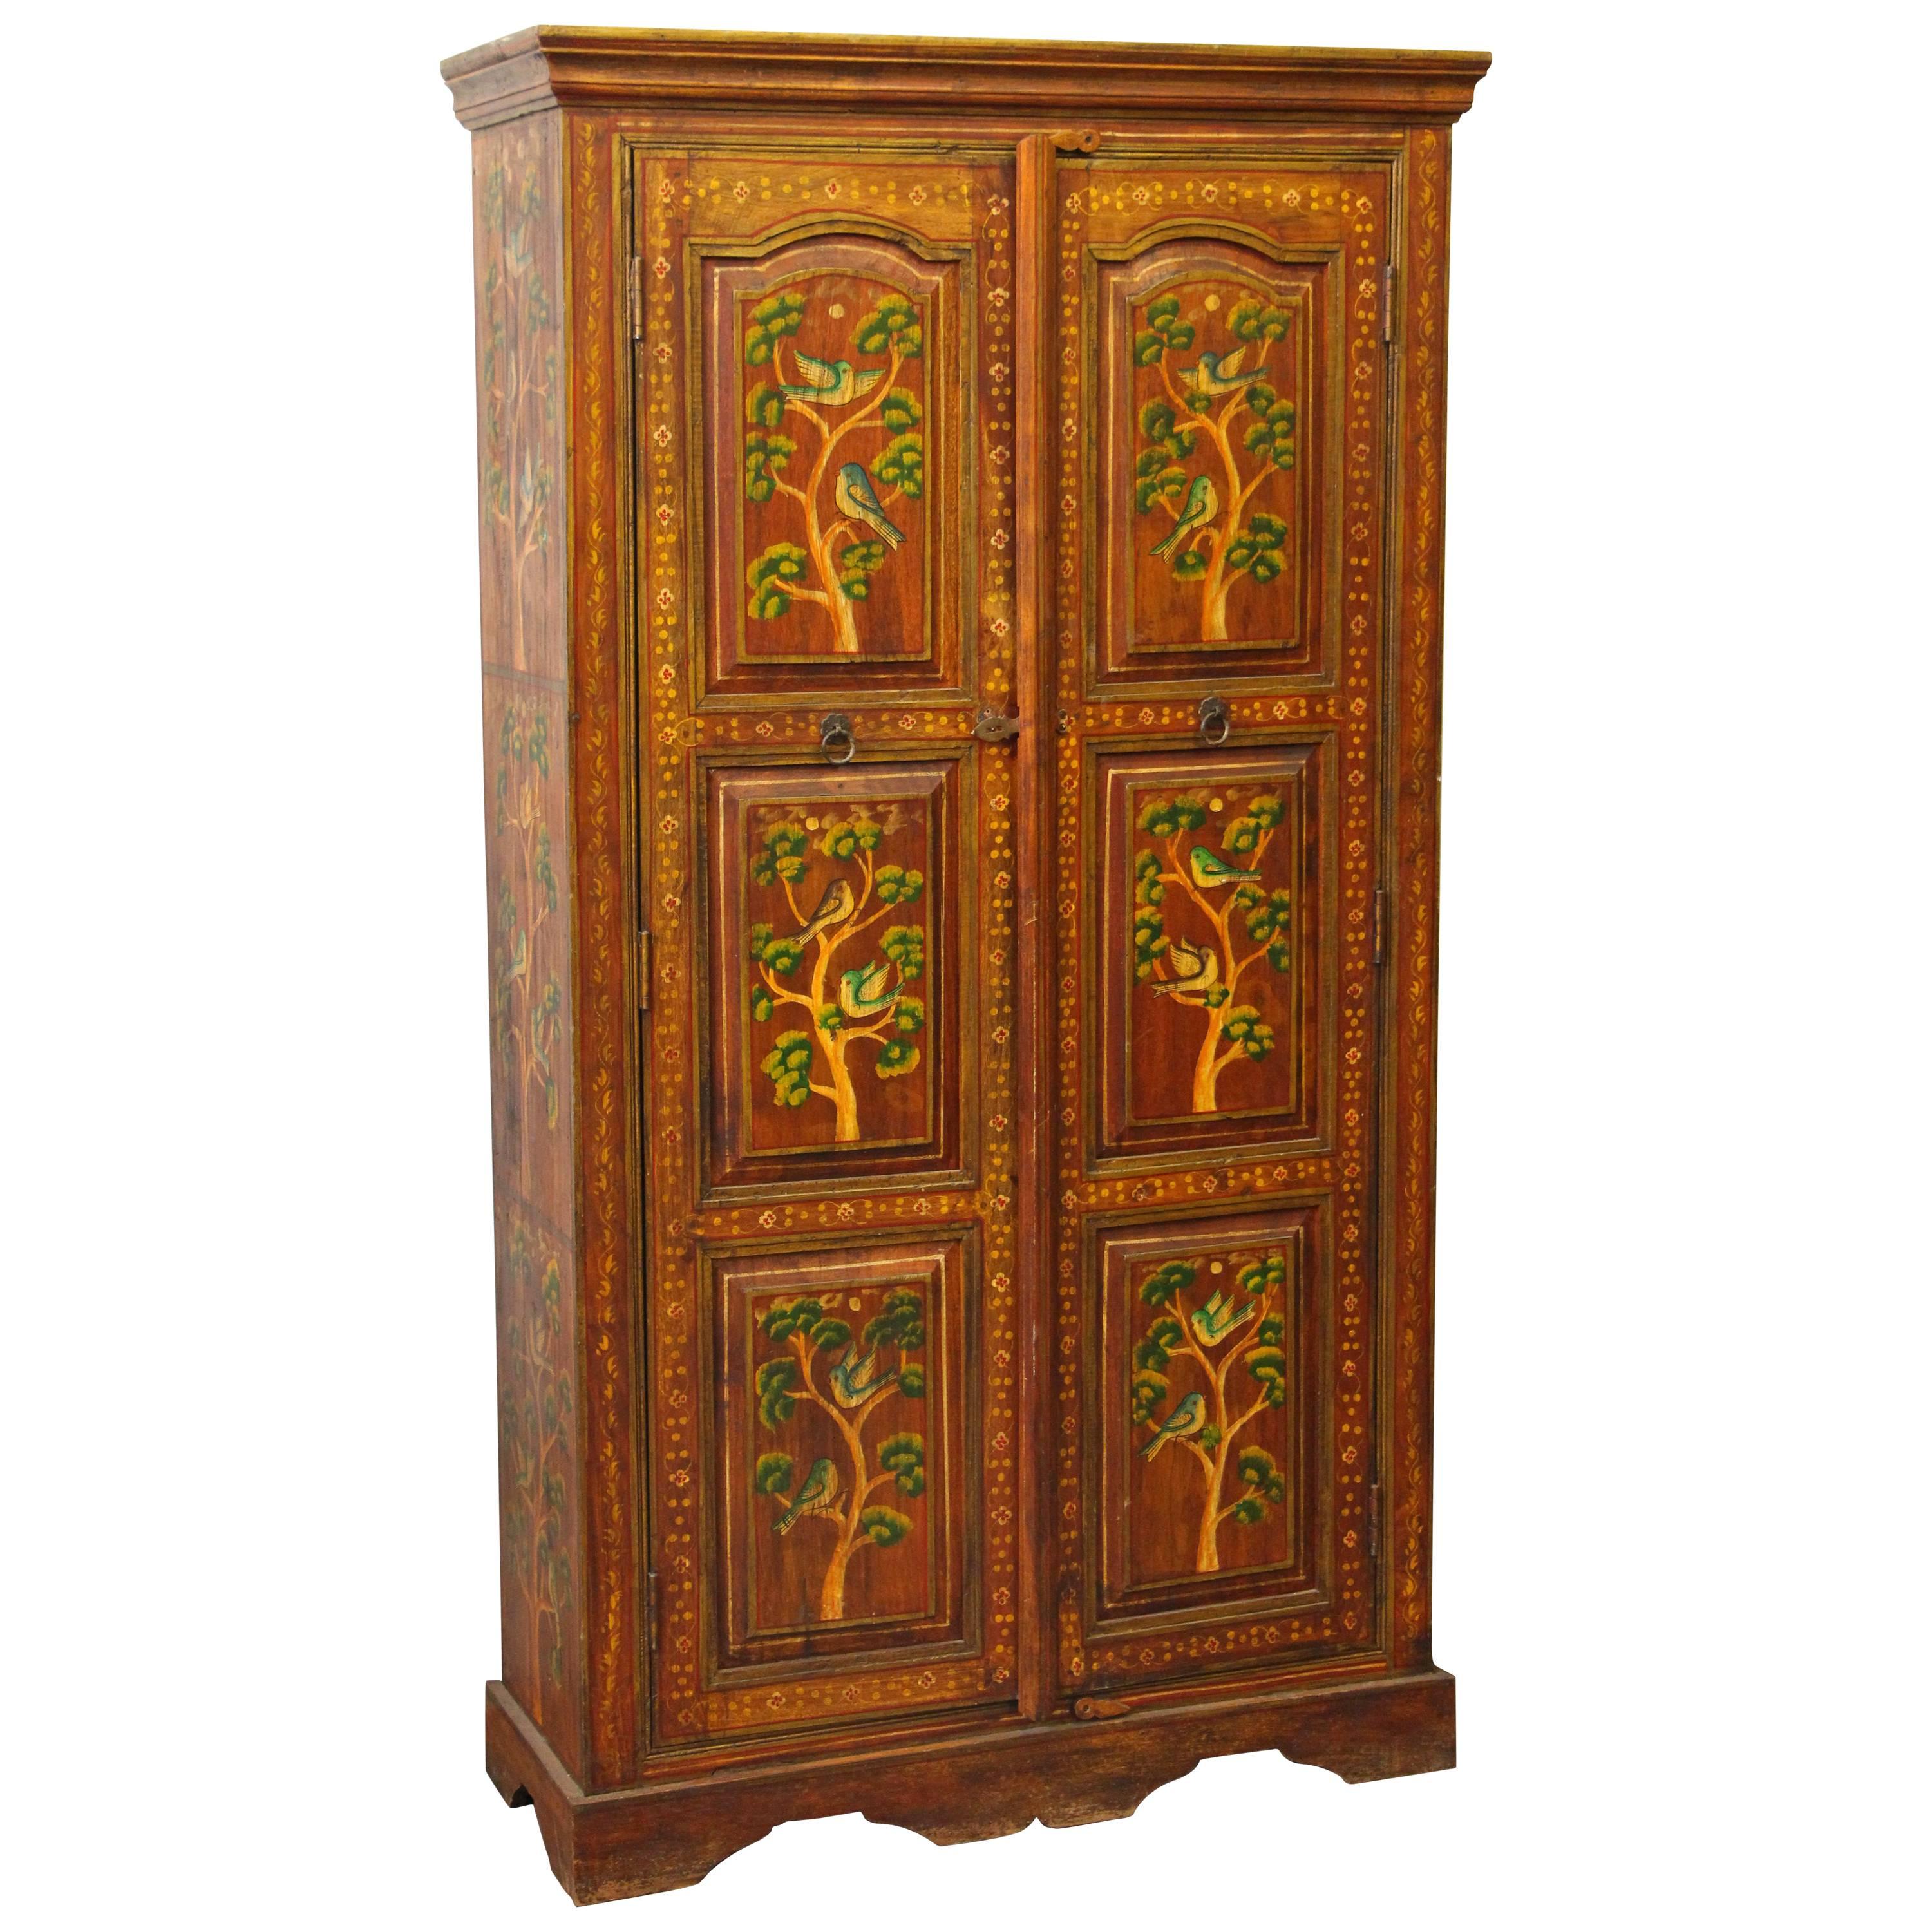 1990s Hand-Painted Floral Wood Cabinet with Three Shelves